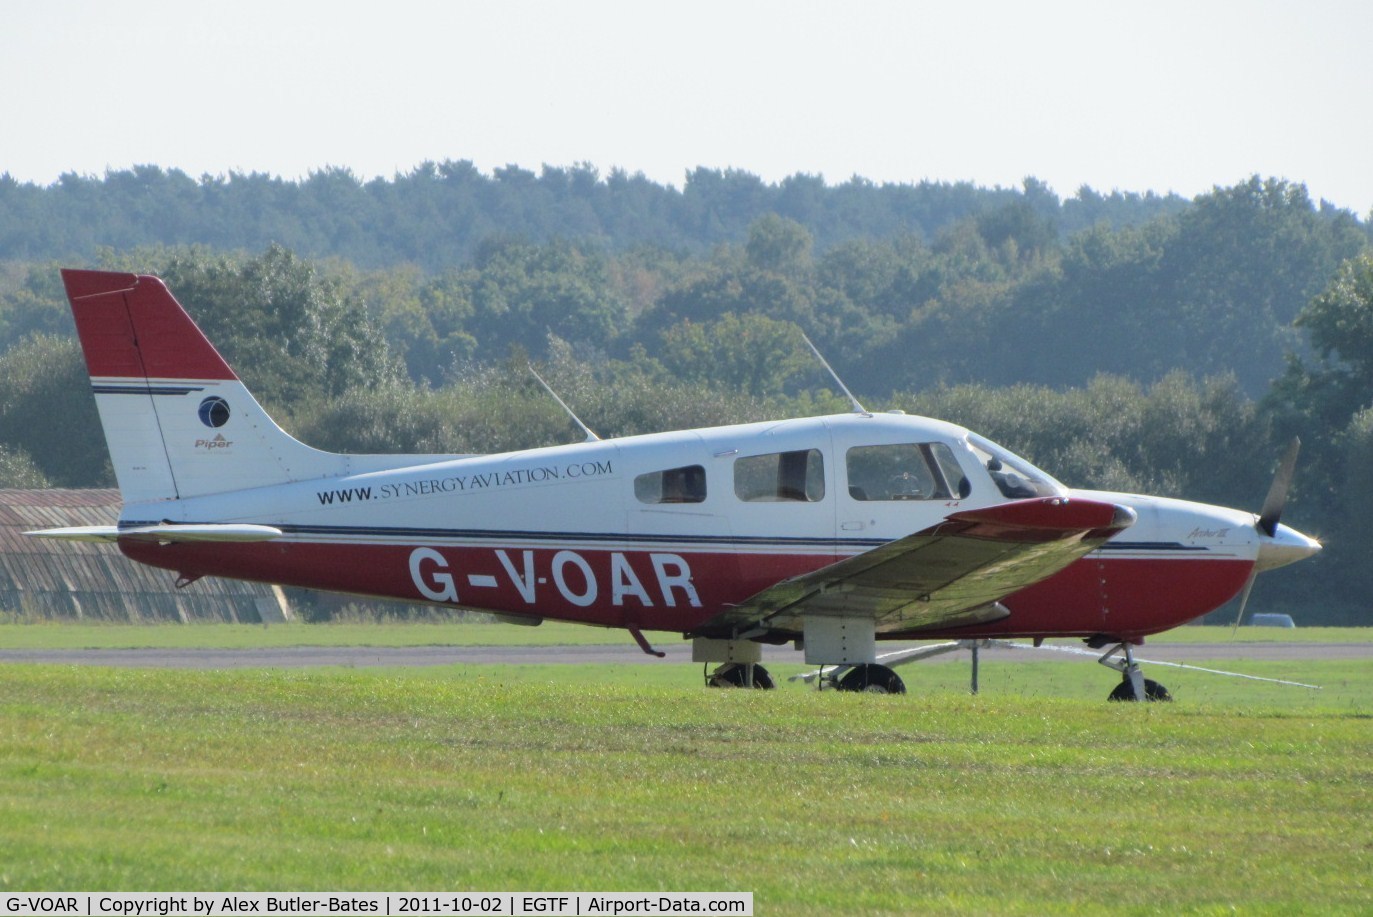 G-VOAR, 1995 Piper PA-28-181 Cherokee Archer III C/N 28-43011, Parked on the grass